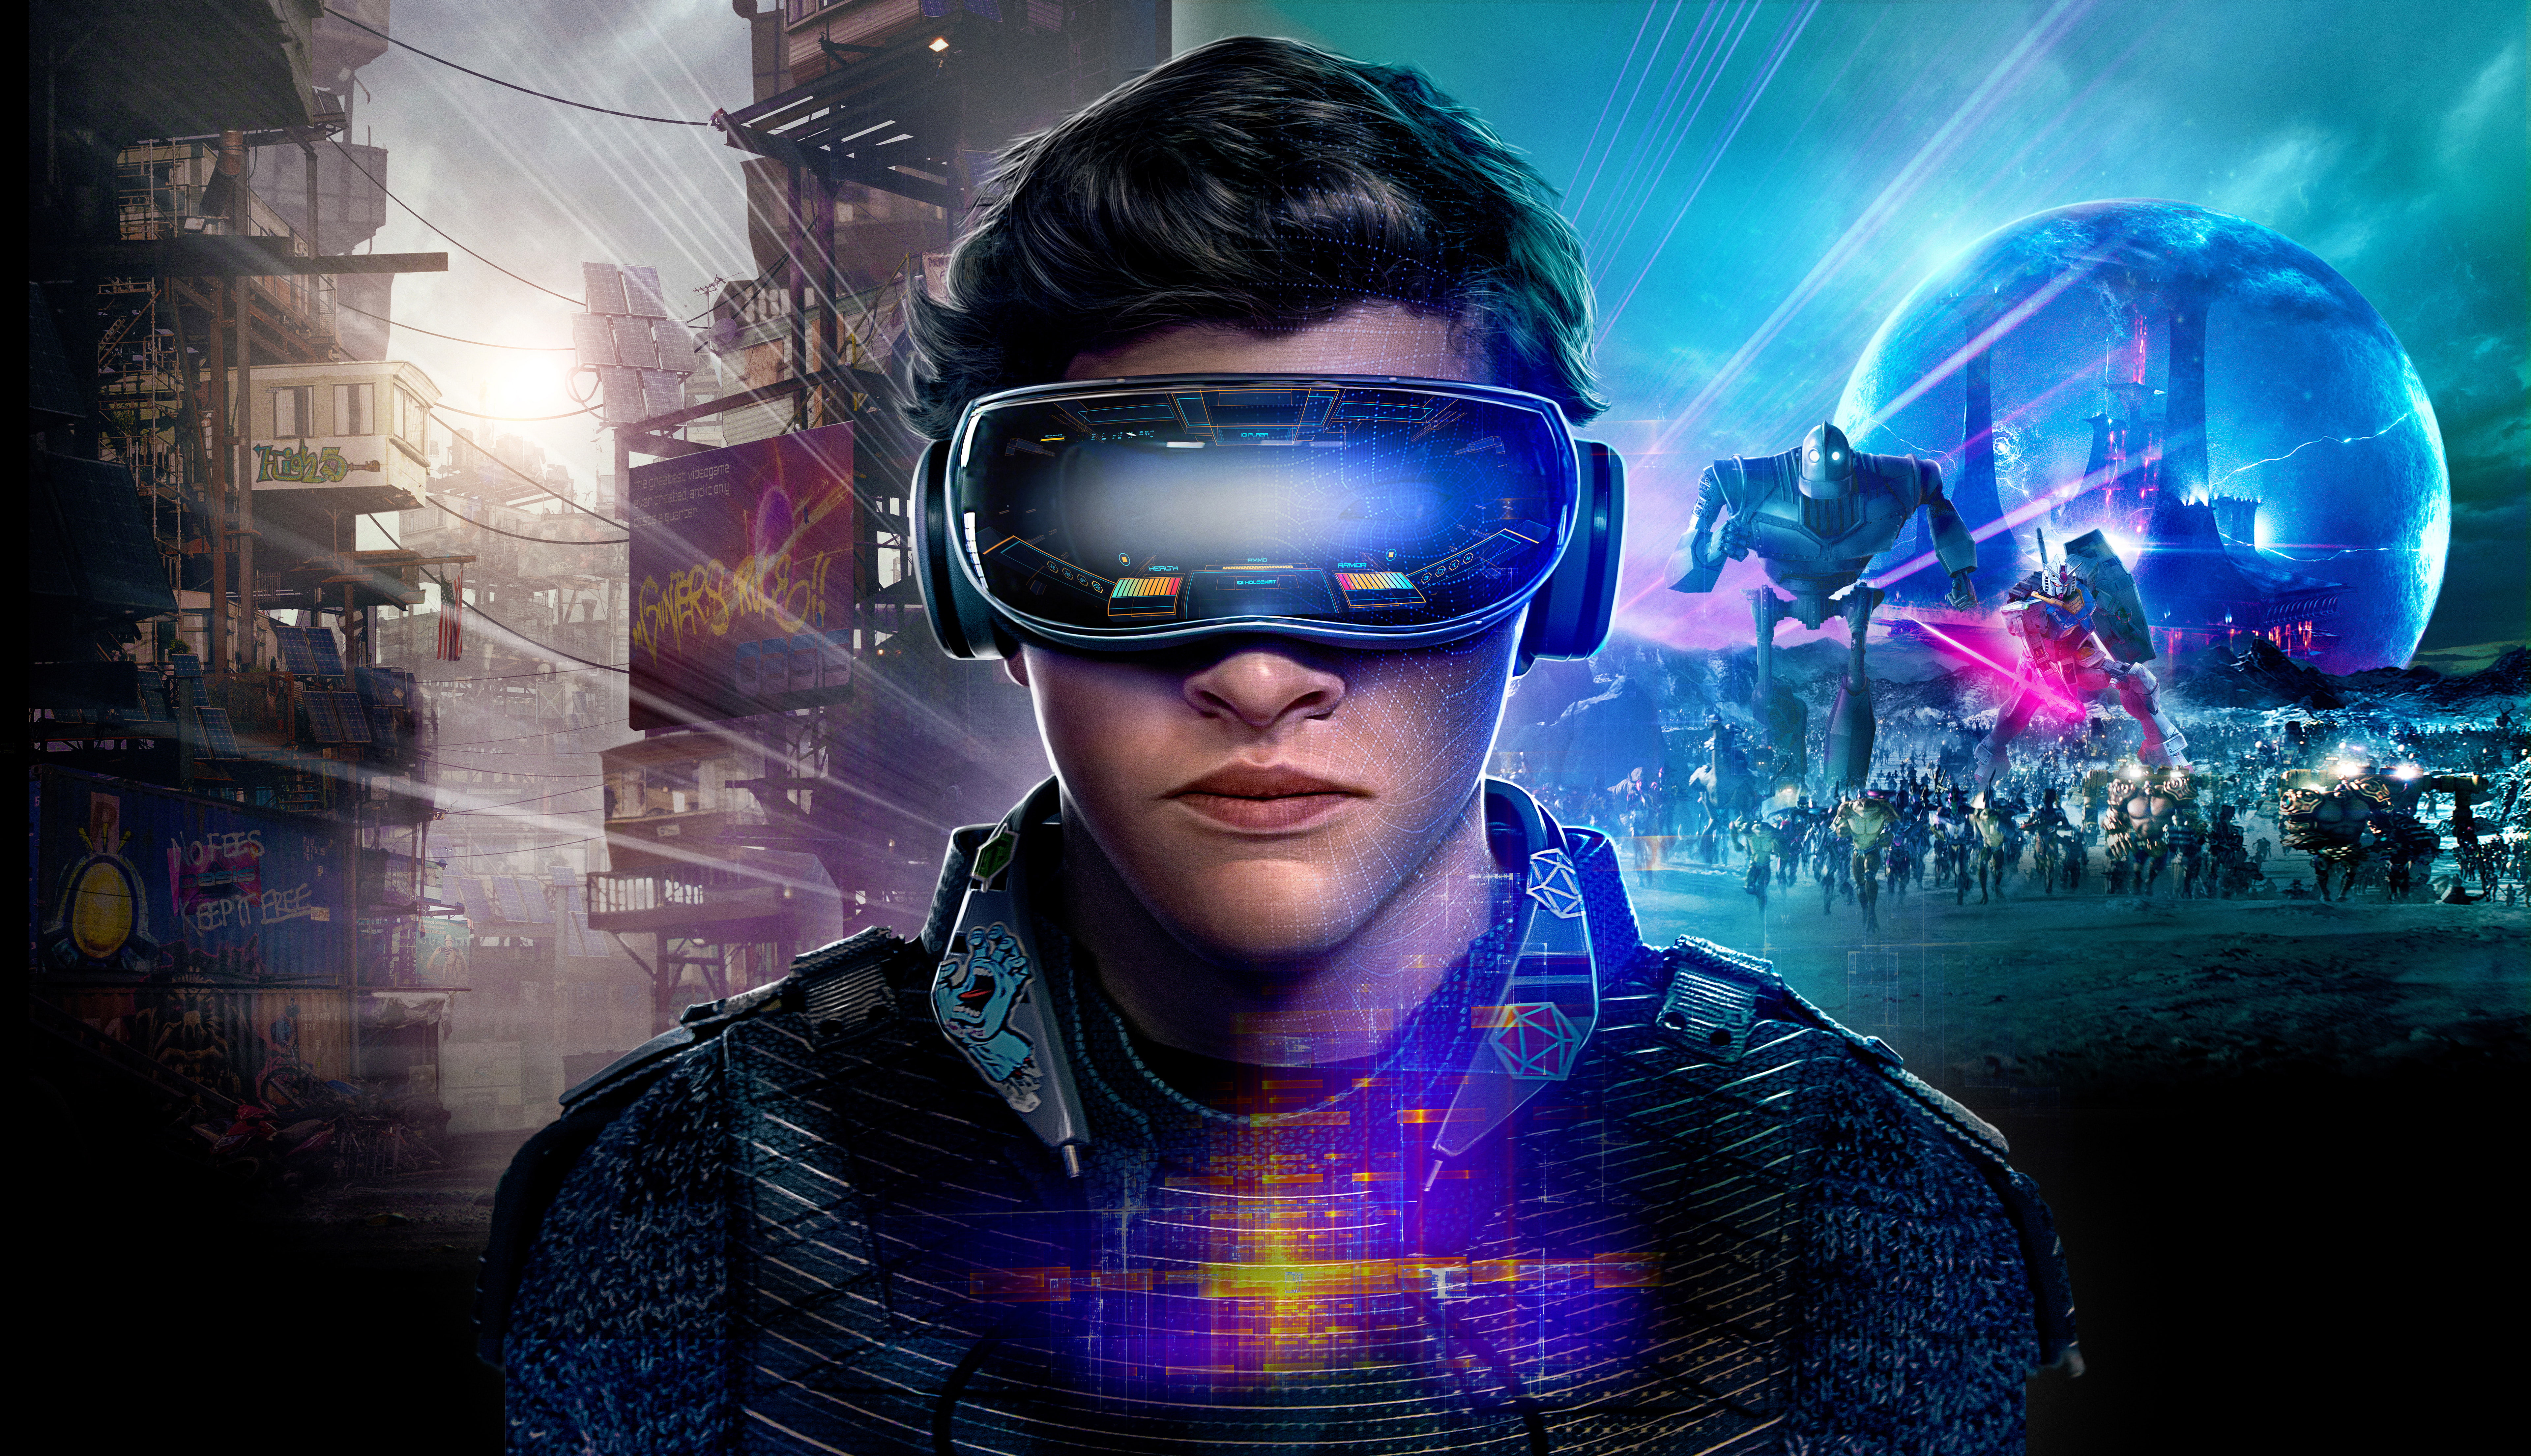 ready player one, 2018 movies, hd, poster, 4k, 5k, 8k, futuristic